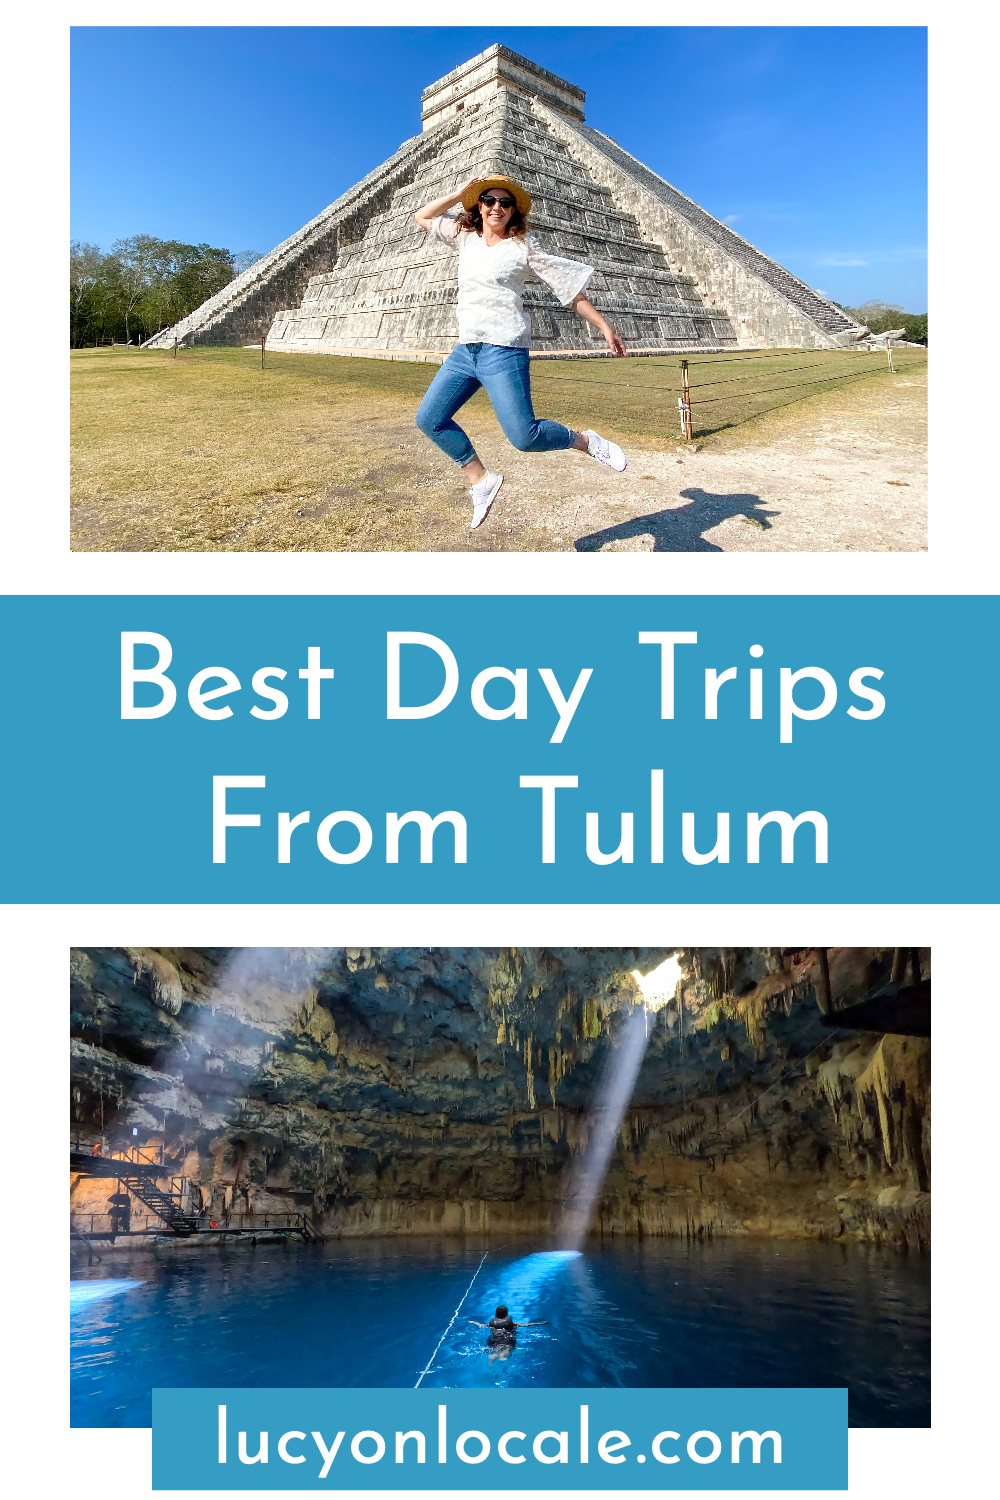 Day trips from Tulum